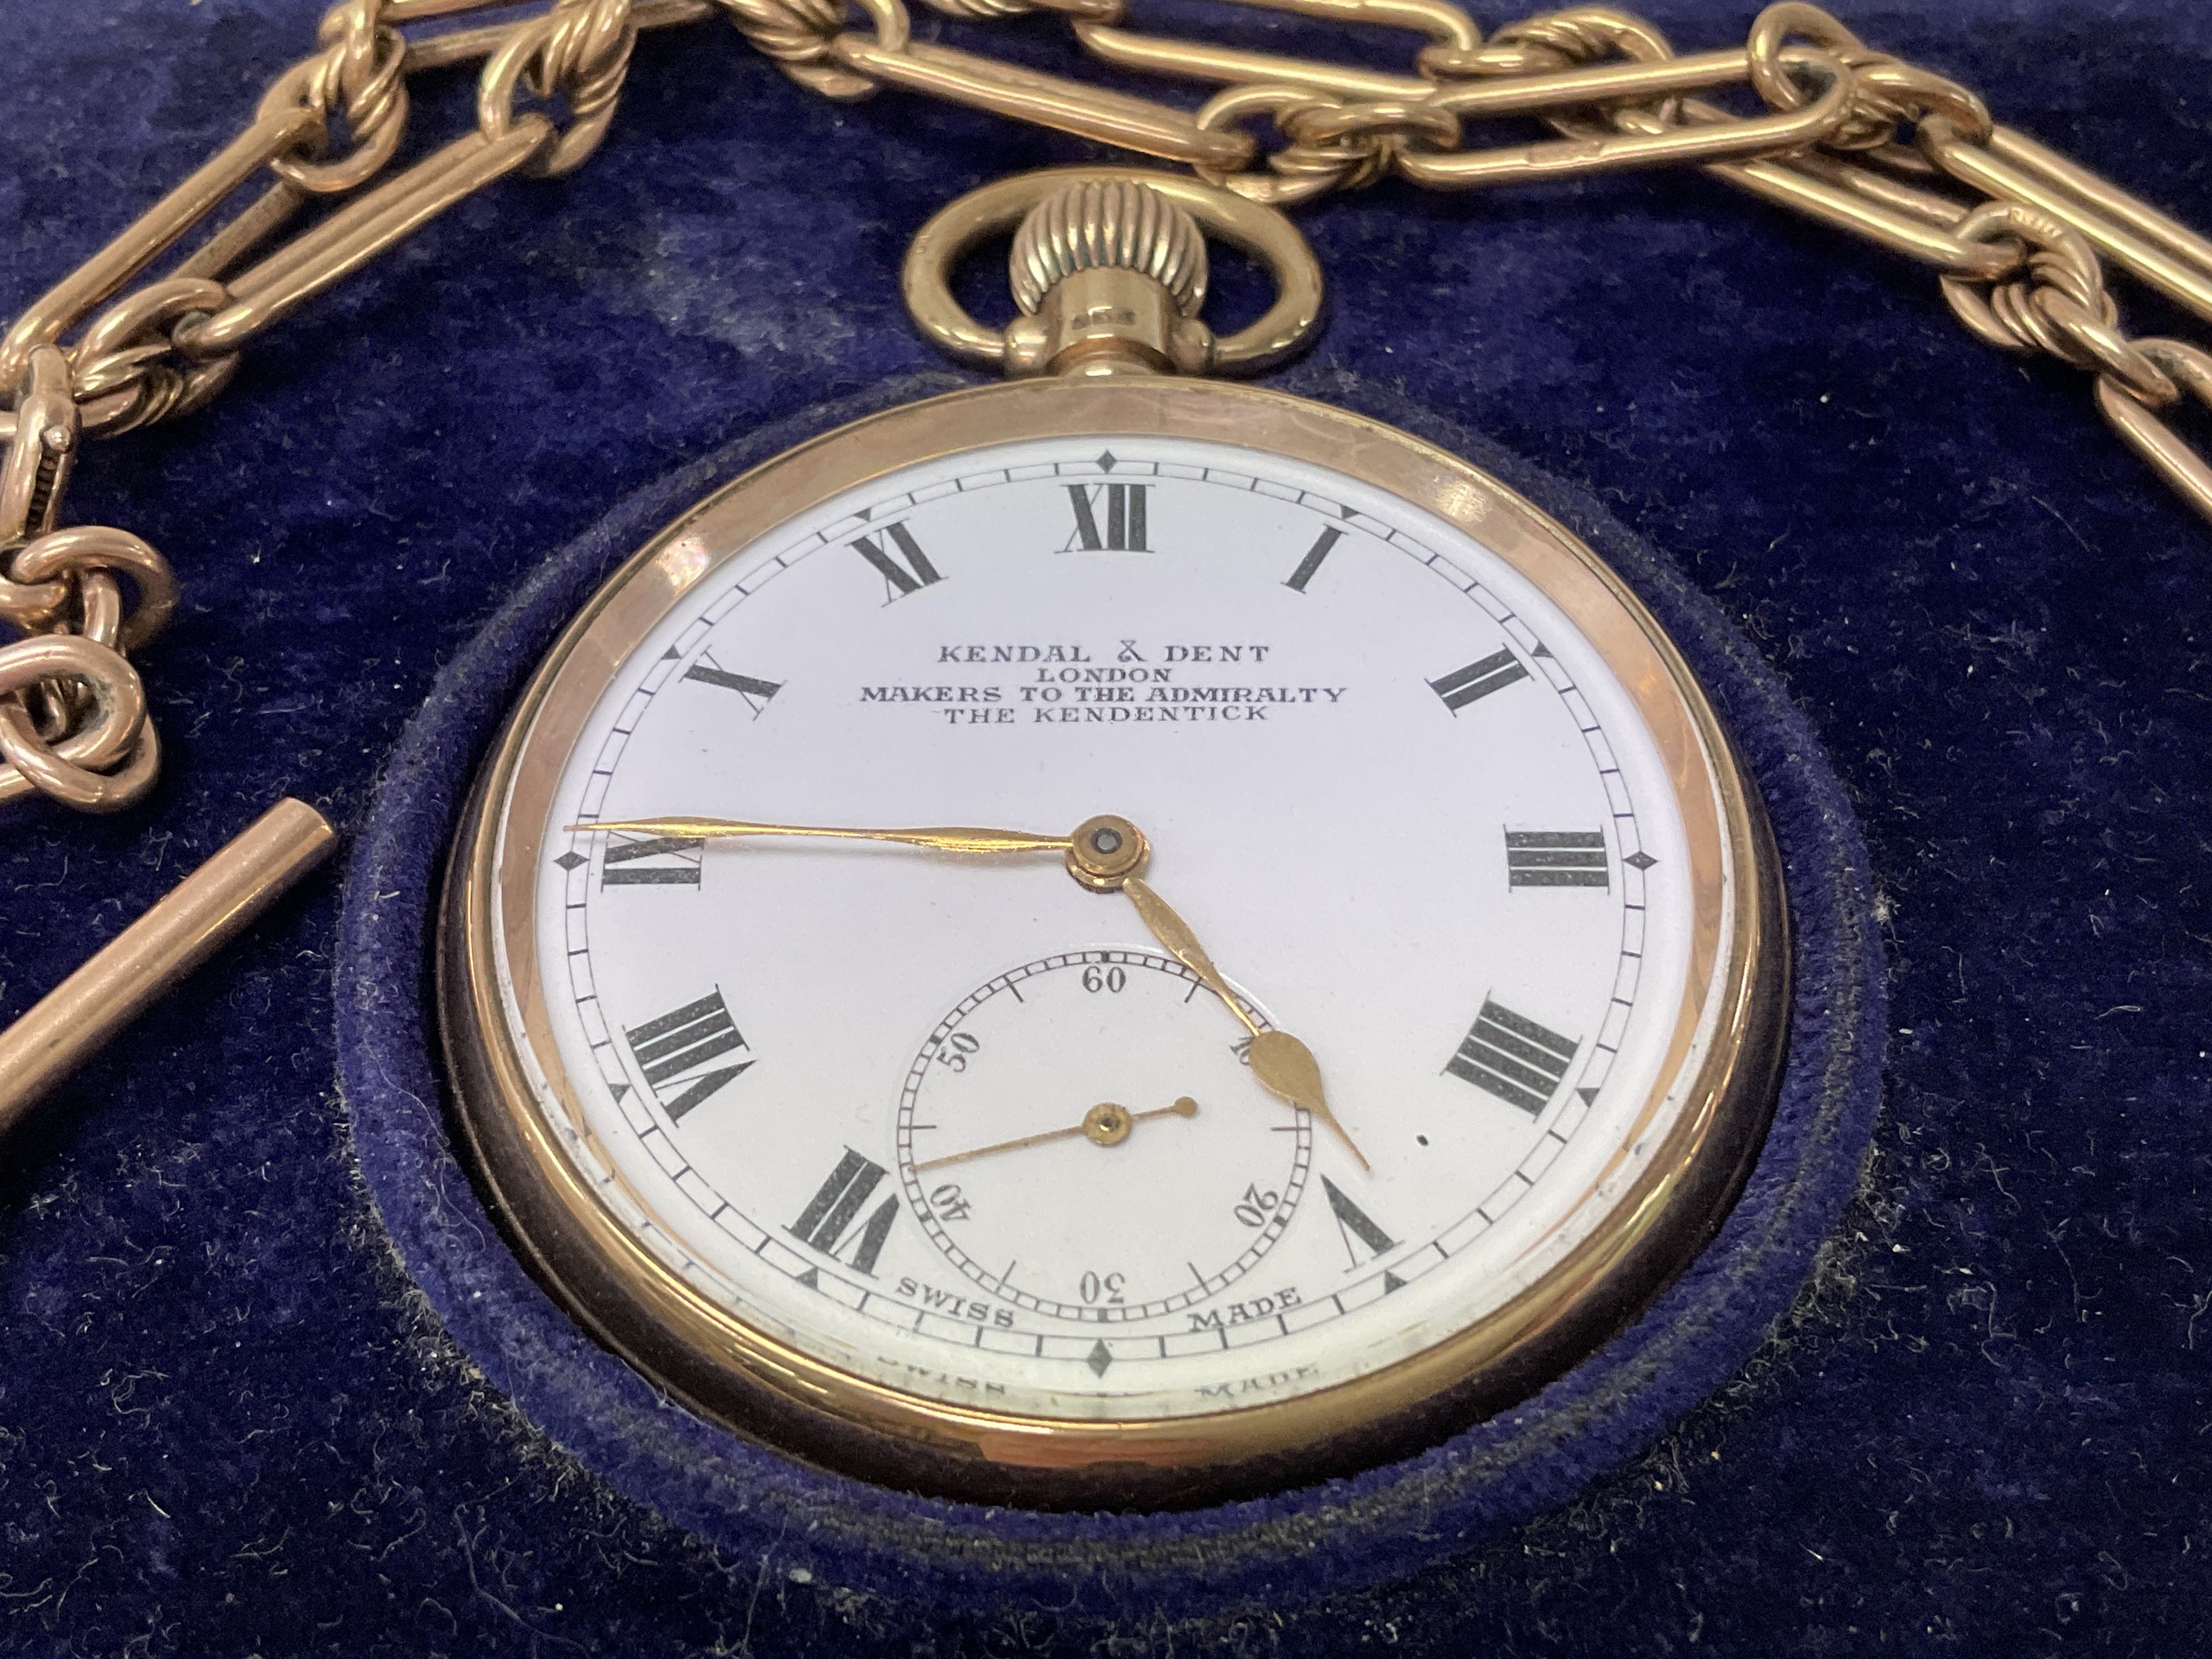 A Kendall & Dent 9ct gold open faced pocket watch - Image 3 of 4